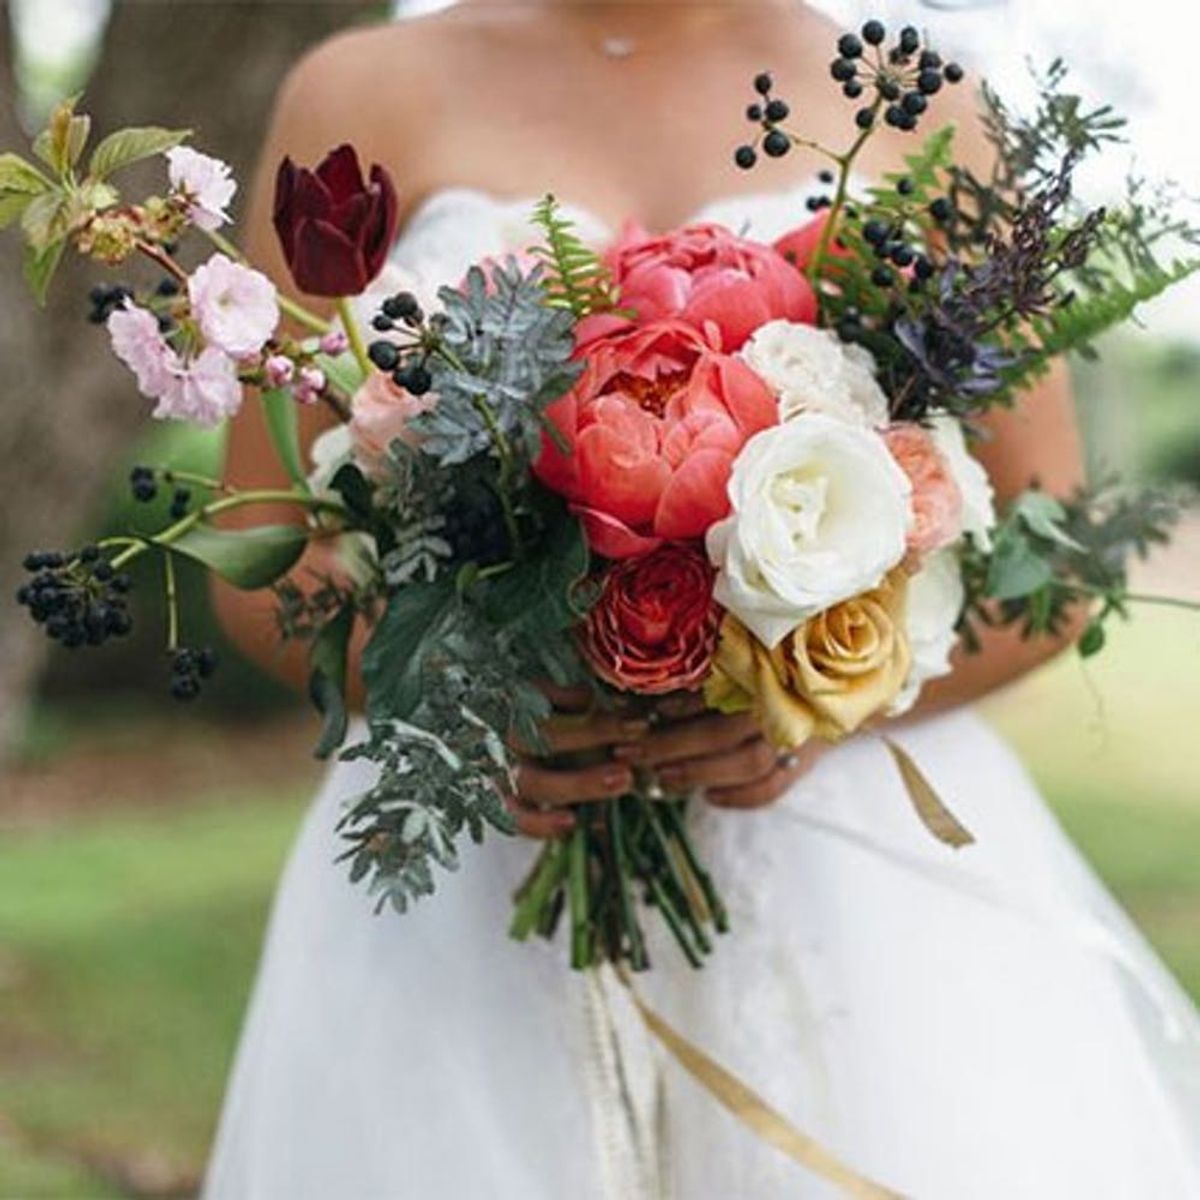 7 Must-Use Flowers for Spring Weddings